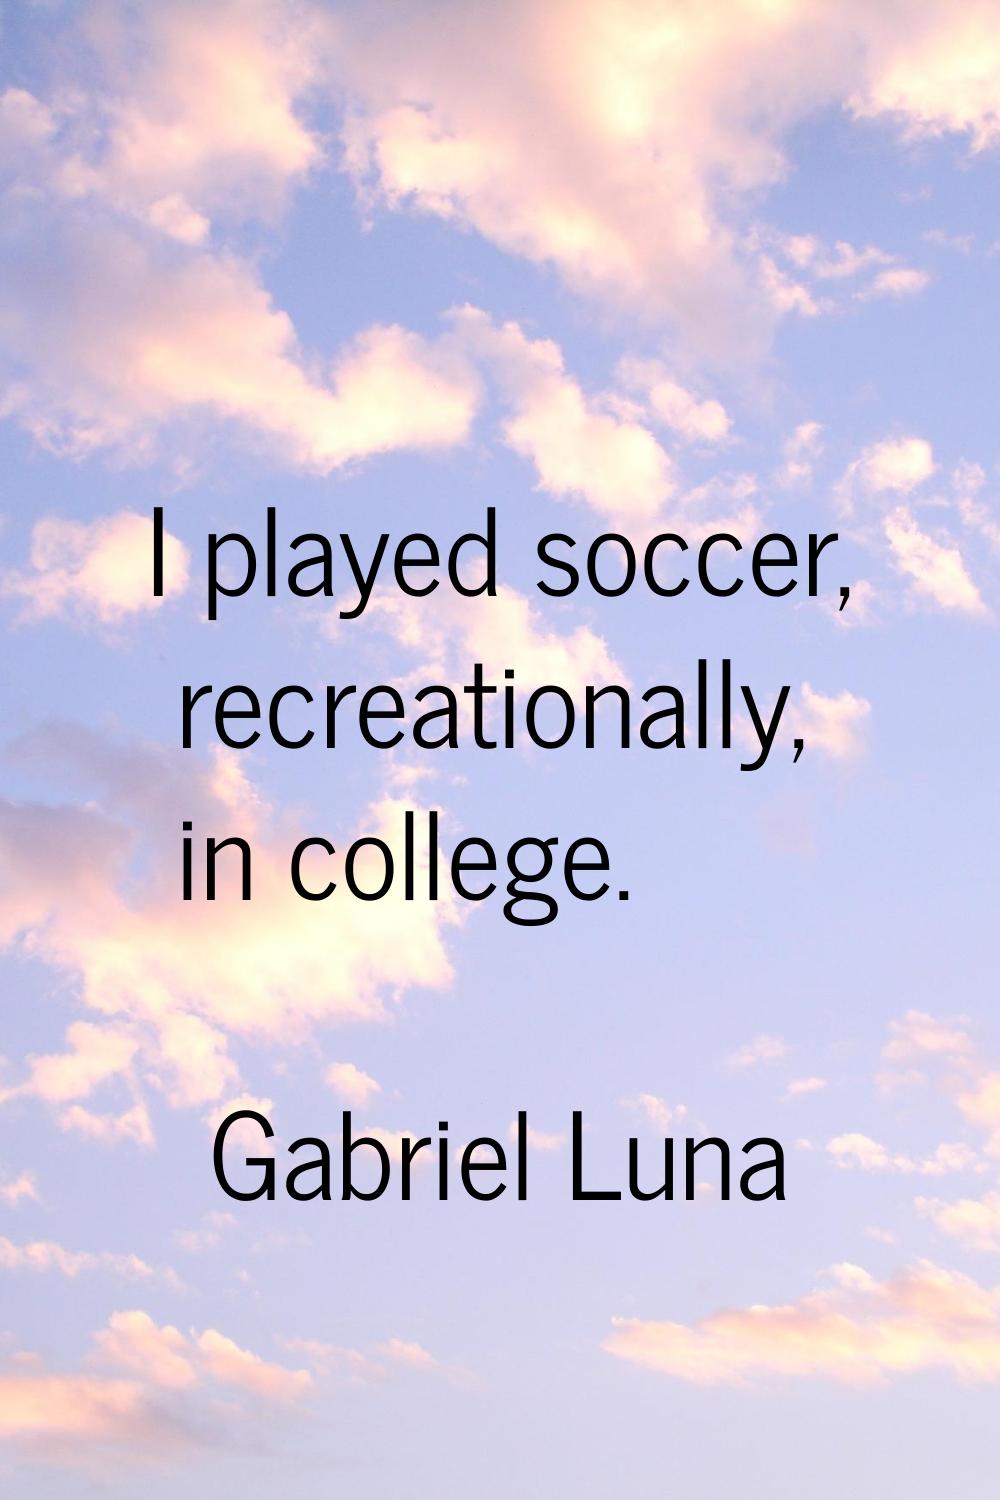 I played soccer, recreationally, in college.